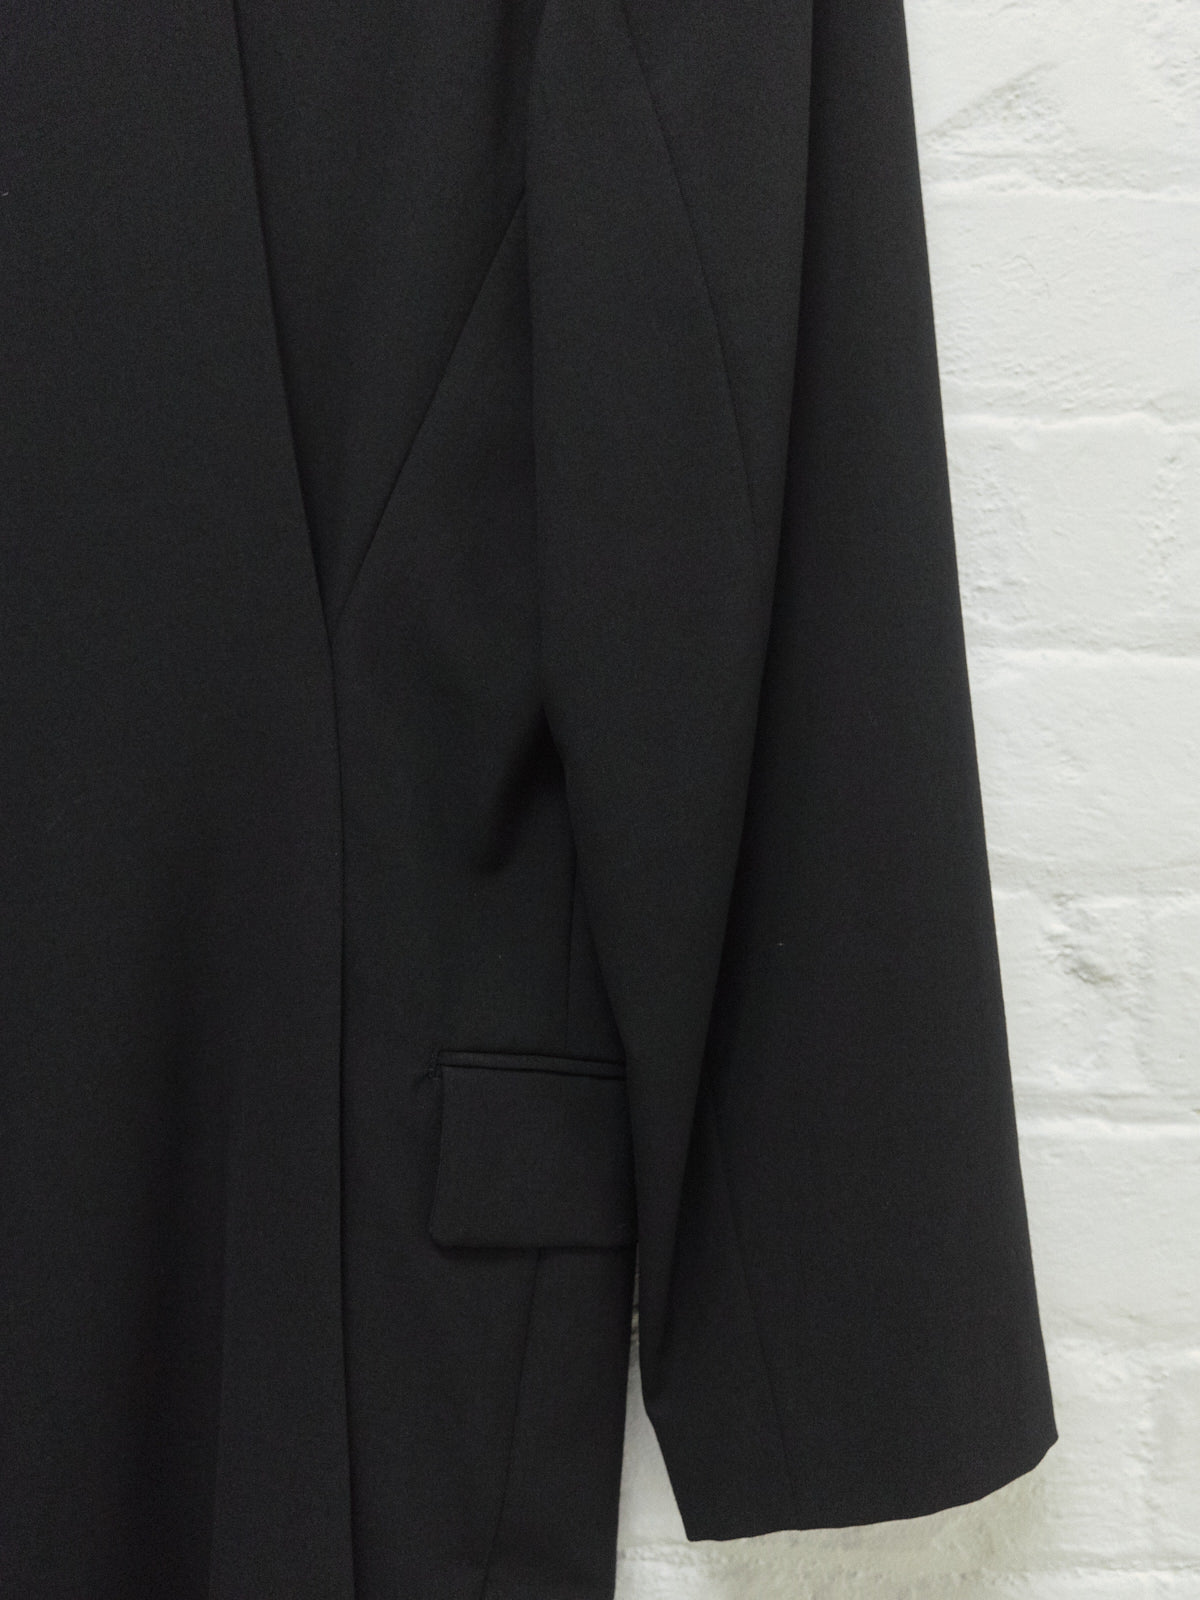 Comme des Garcons AW1992 black wool back tuck 3 button coat - womens M S